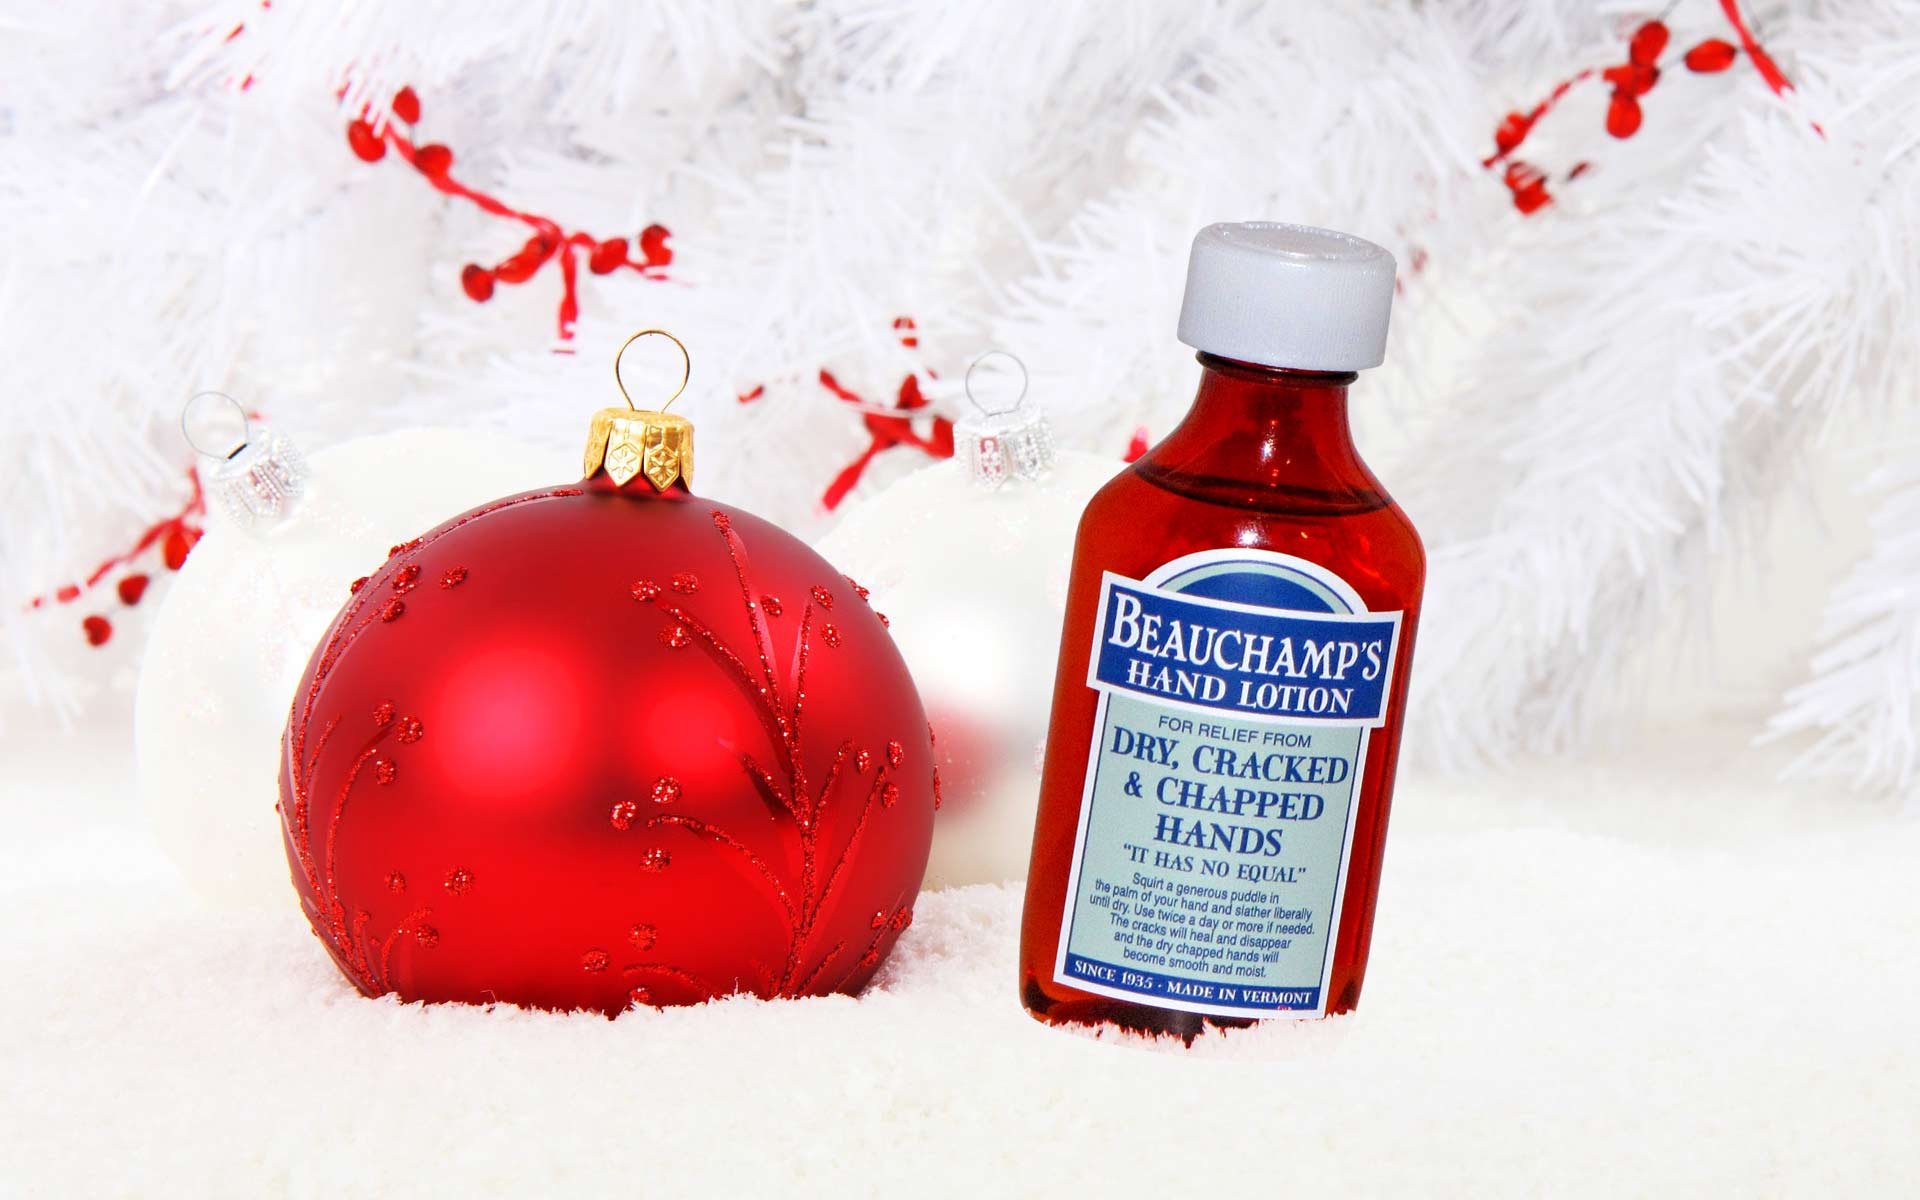 Merry Christmas from Beauchamp's Hand Lotion